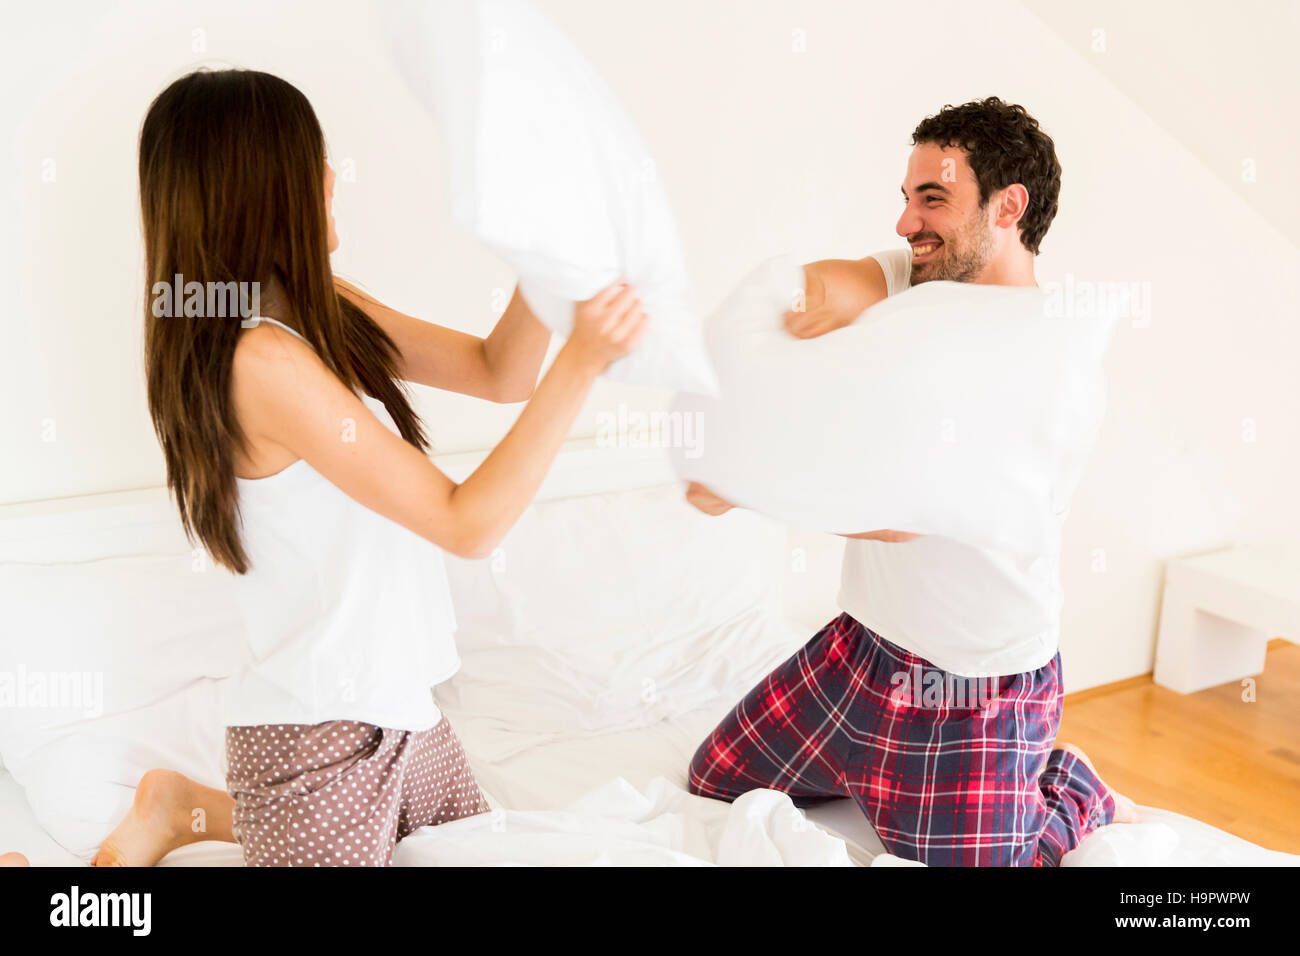 Couple having fun with a pillow fight in bed Stock Photo